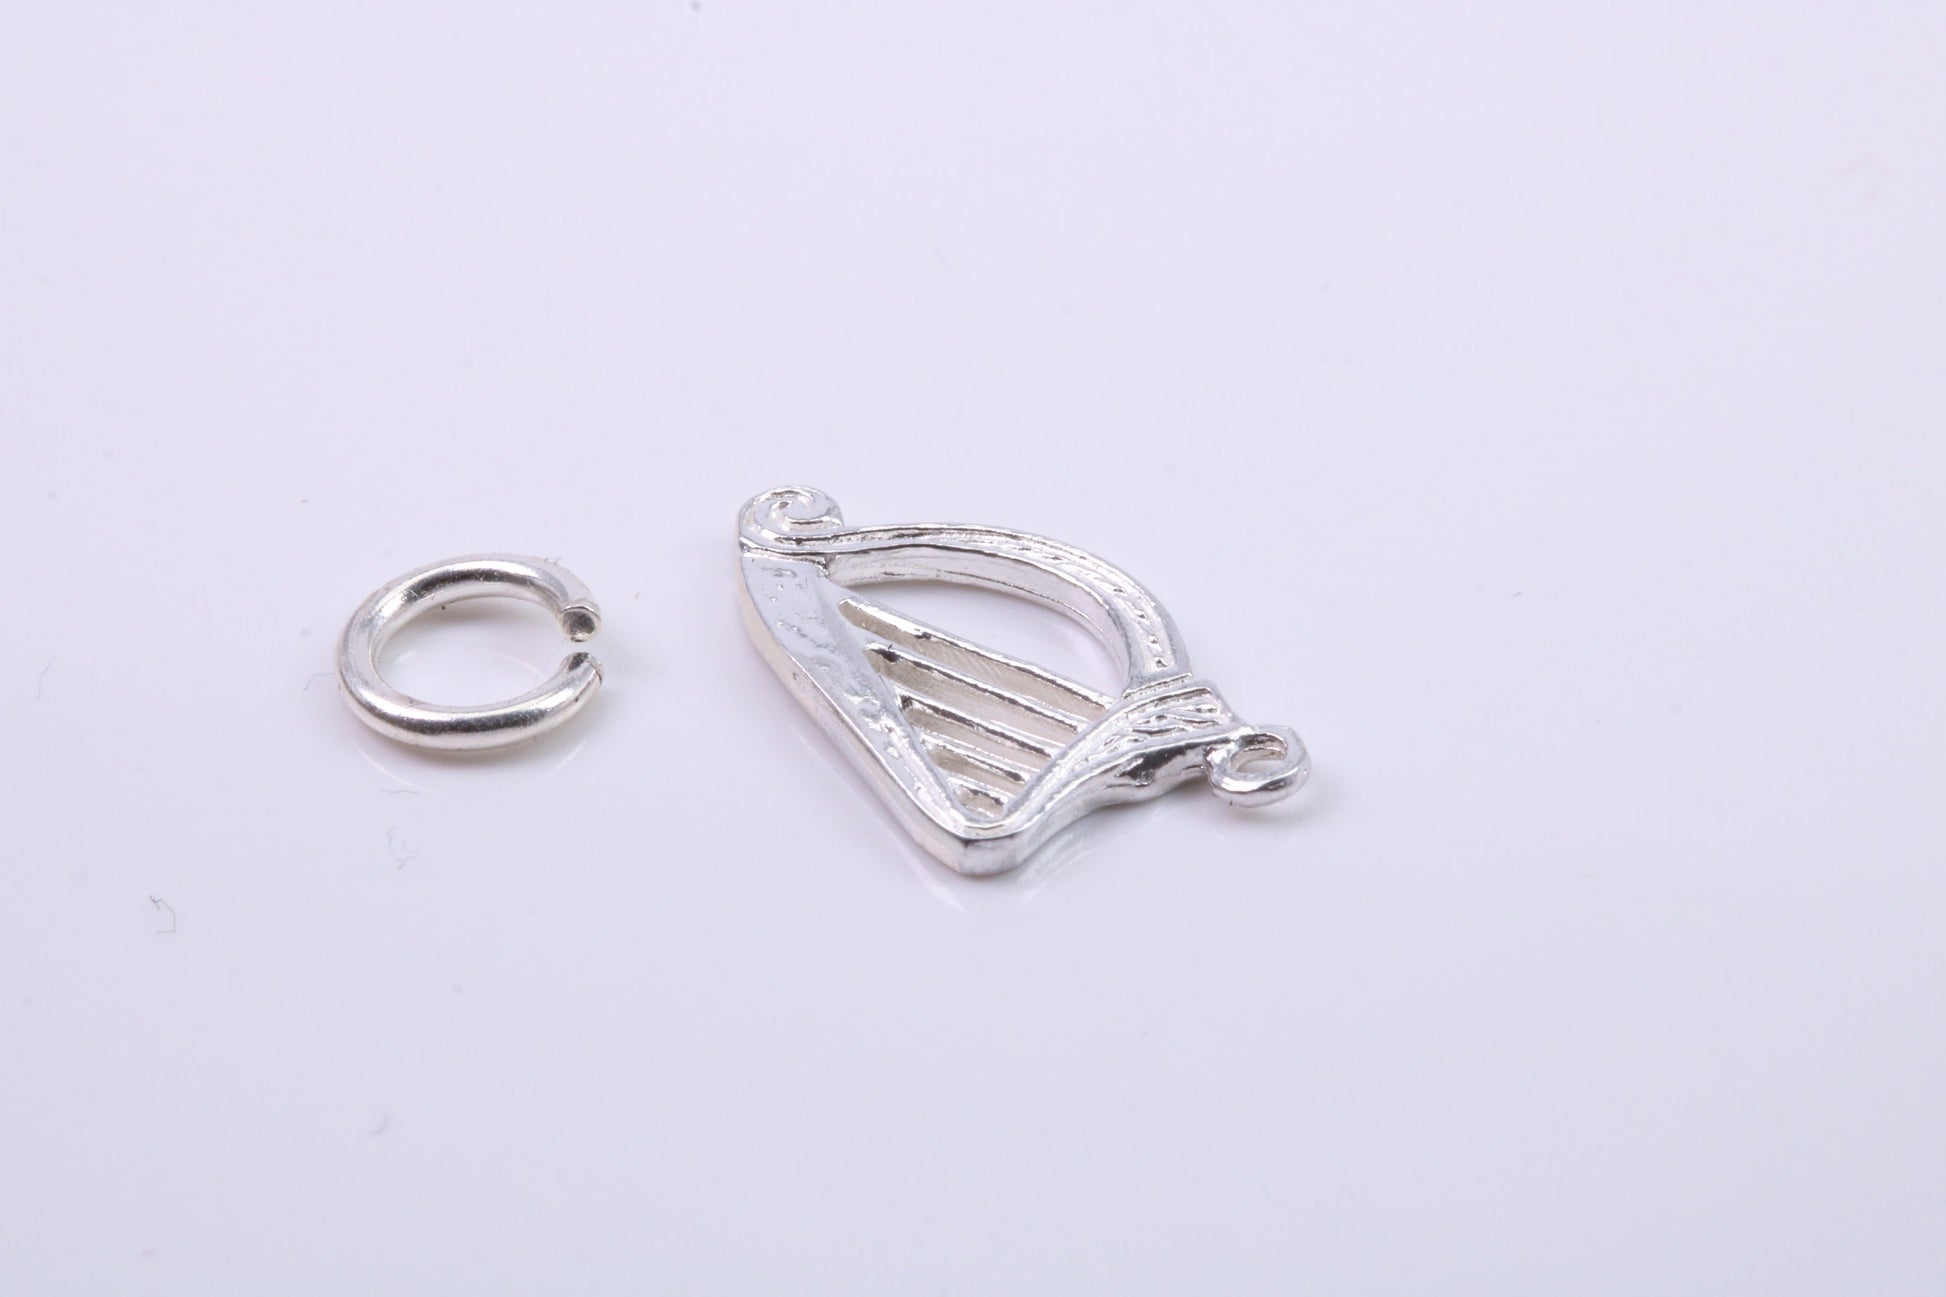 Harp Charm, Traditional Charm, Made from Solid 925 Grade Sterling Silver, Complete with Attachment Link